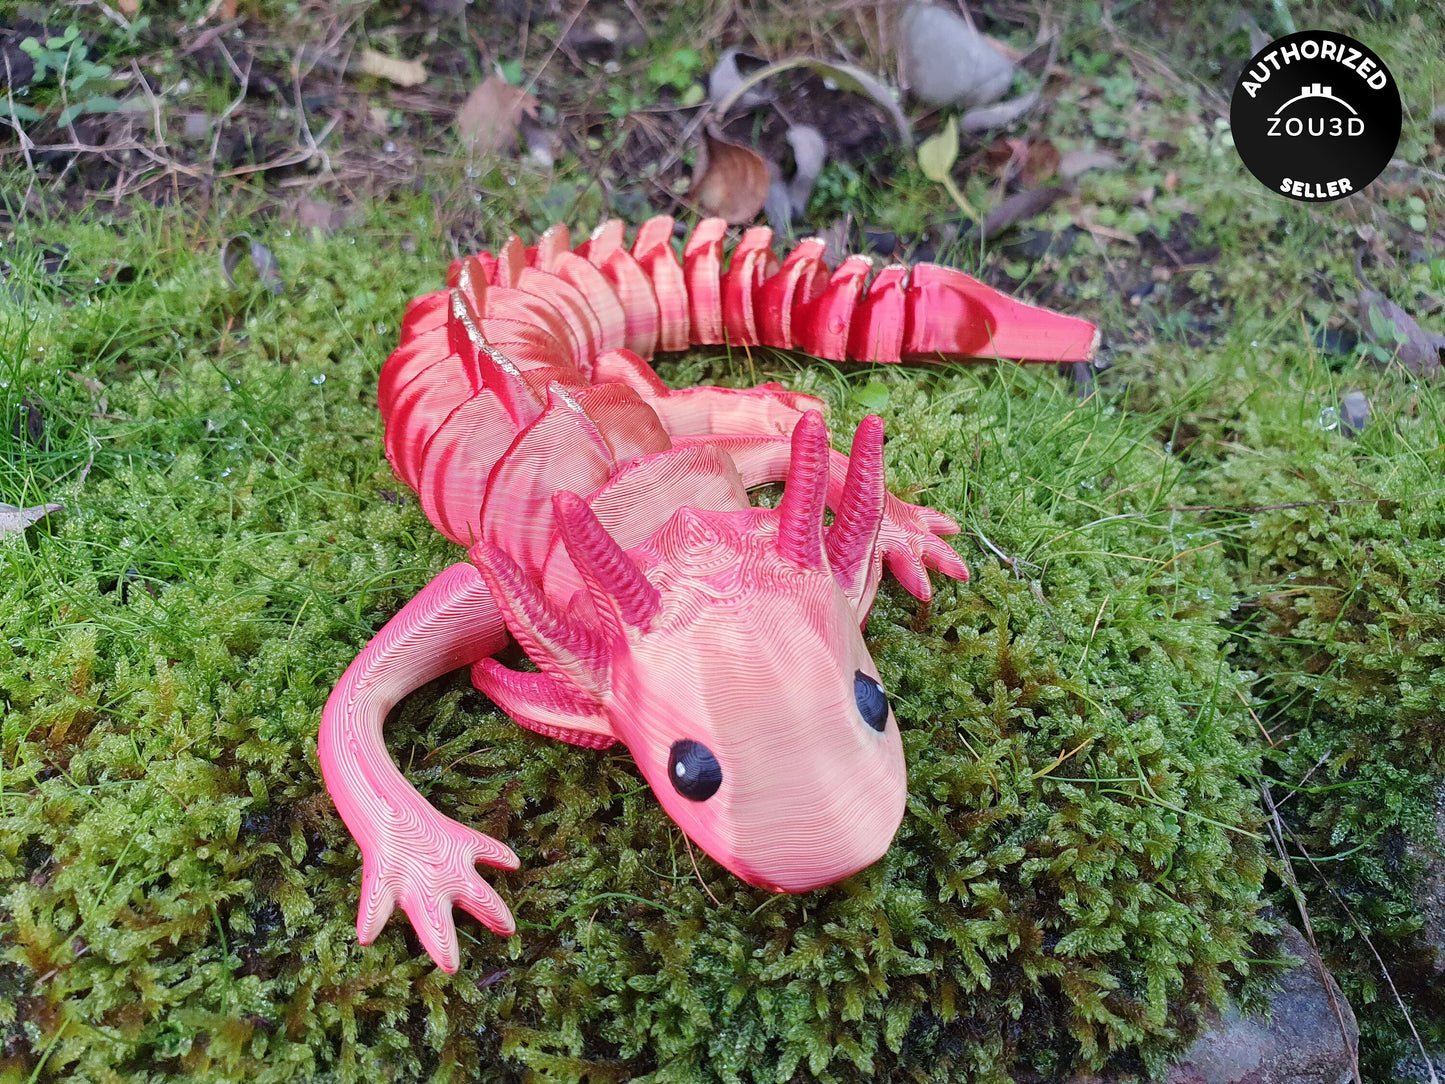 Cute Adult Axolotl - Articulated Flexible 3D Print. Professionally Hand painted finishing details